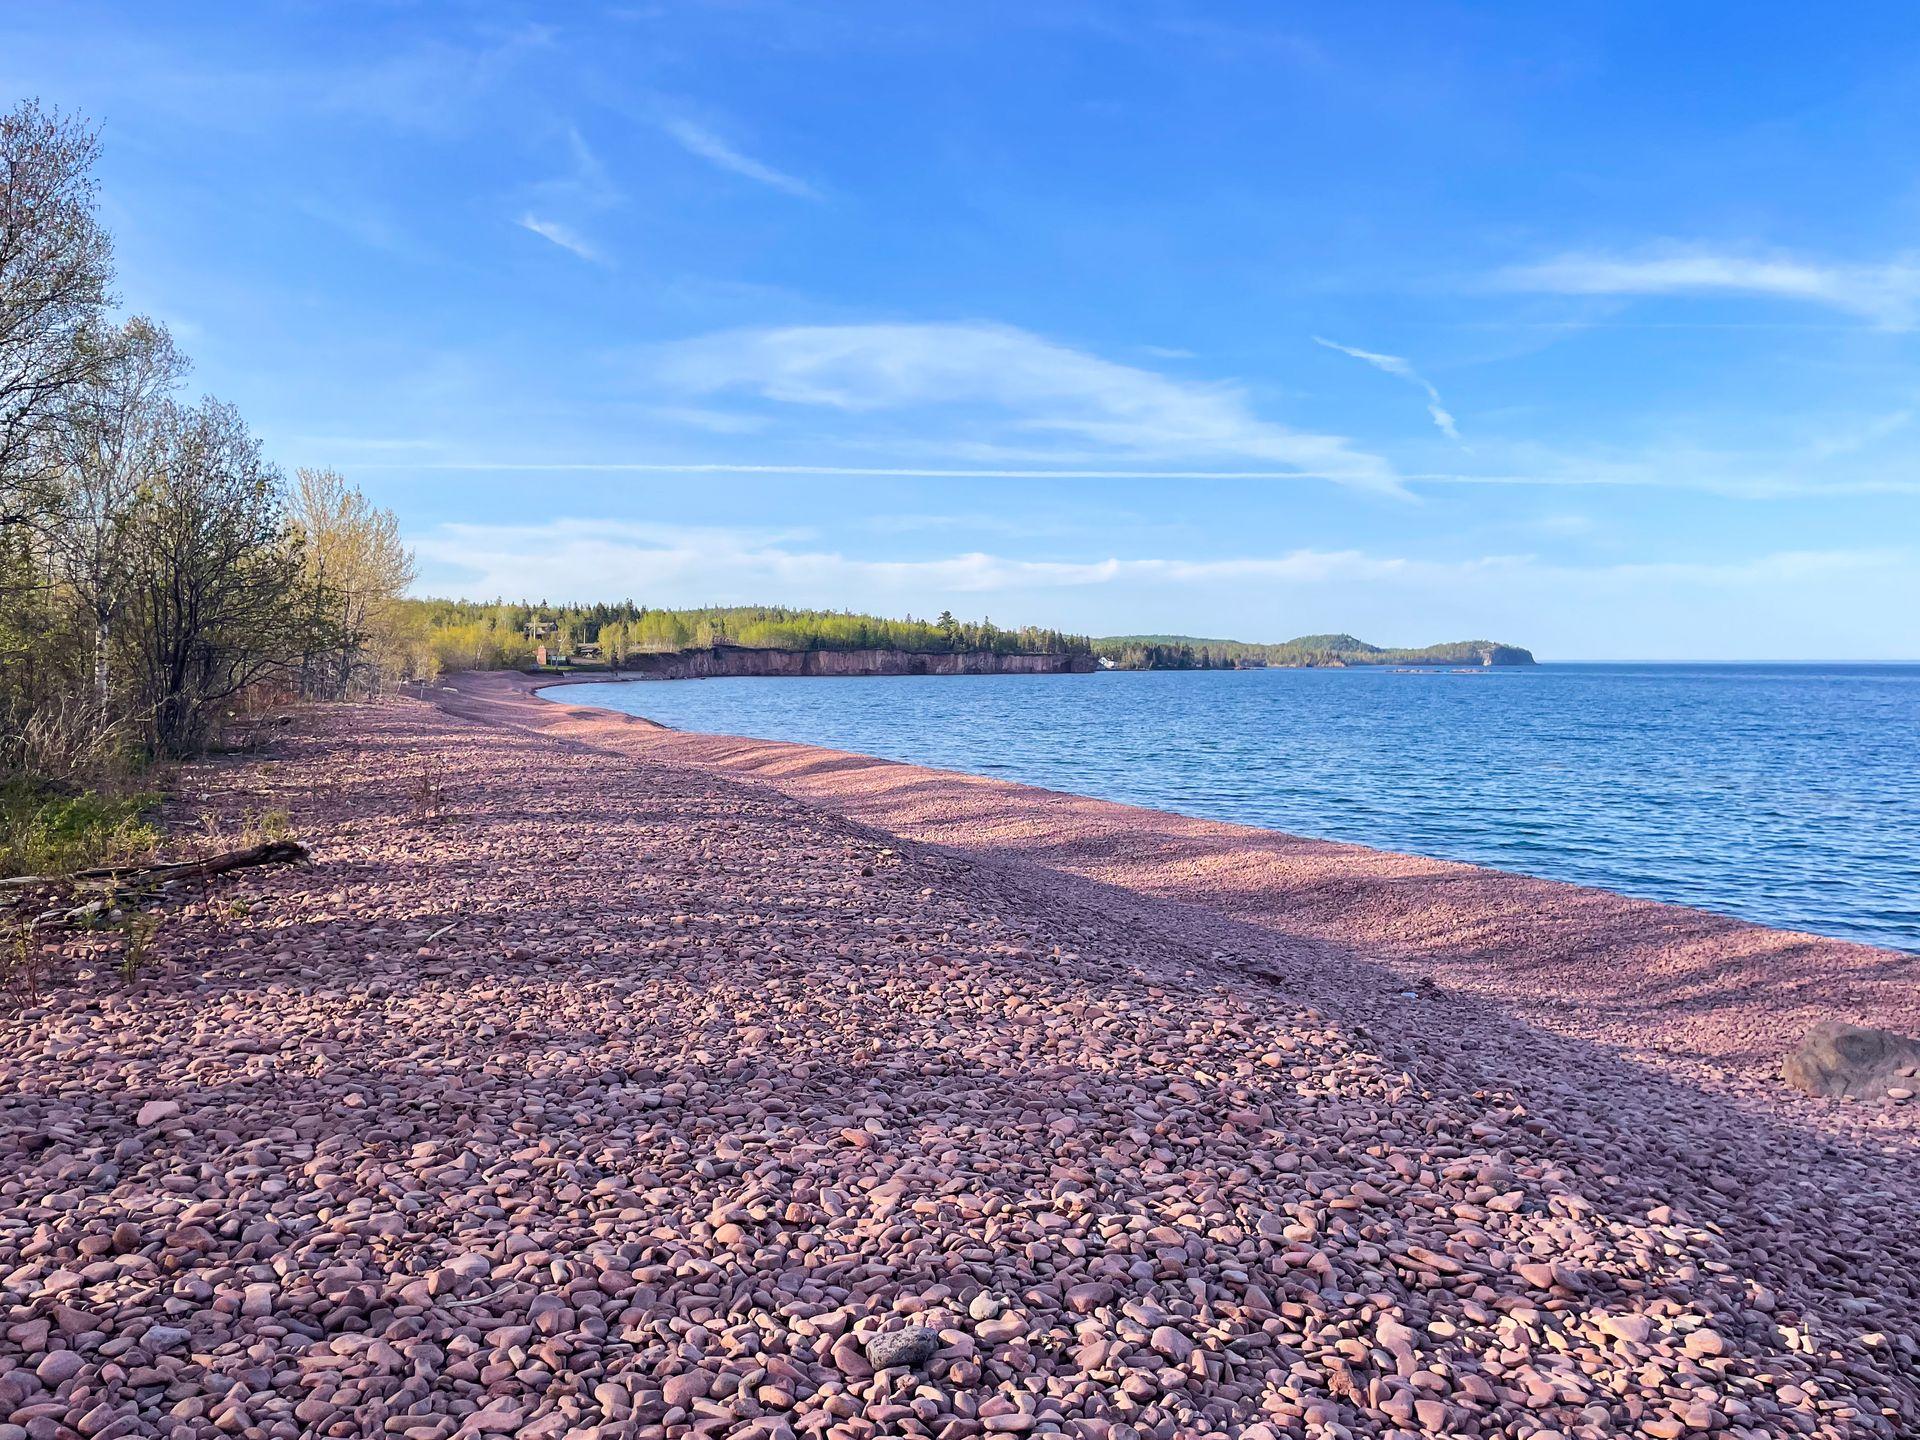 A rocky beach made up entirely of pinkish rocks.